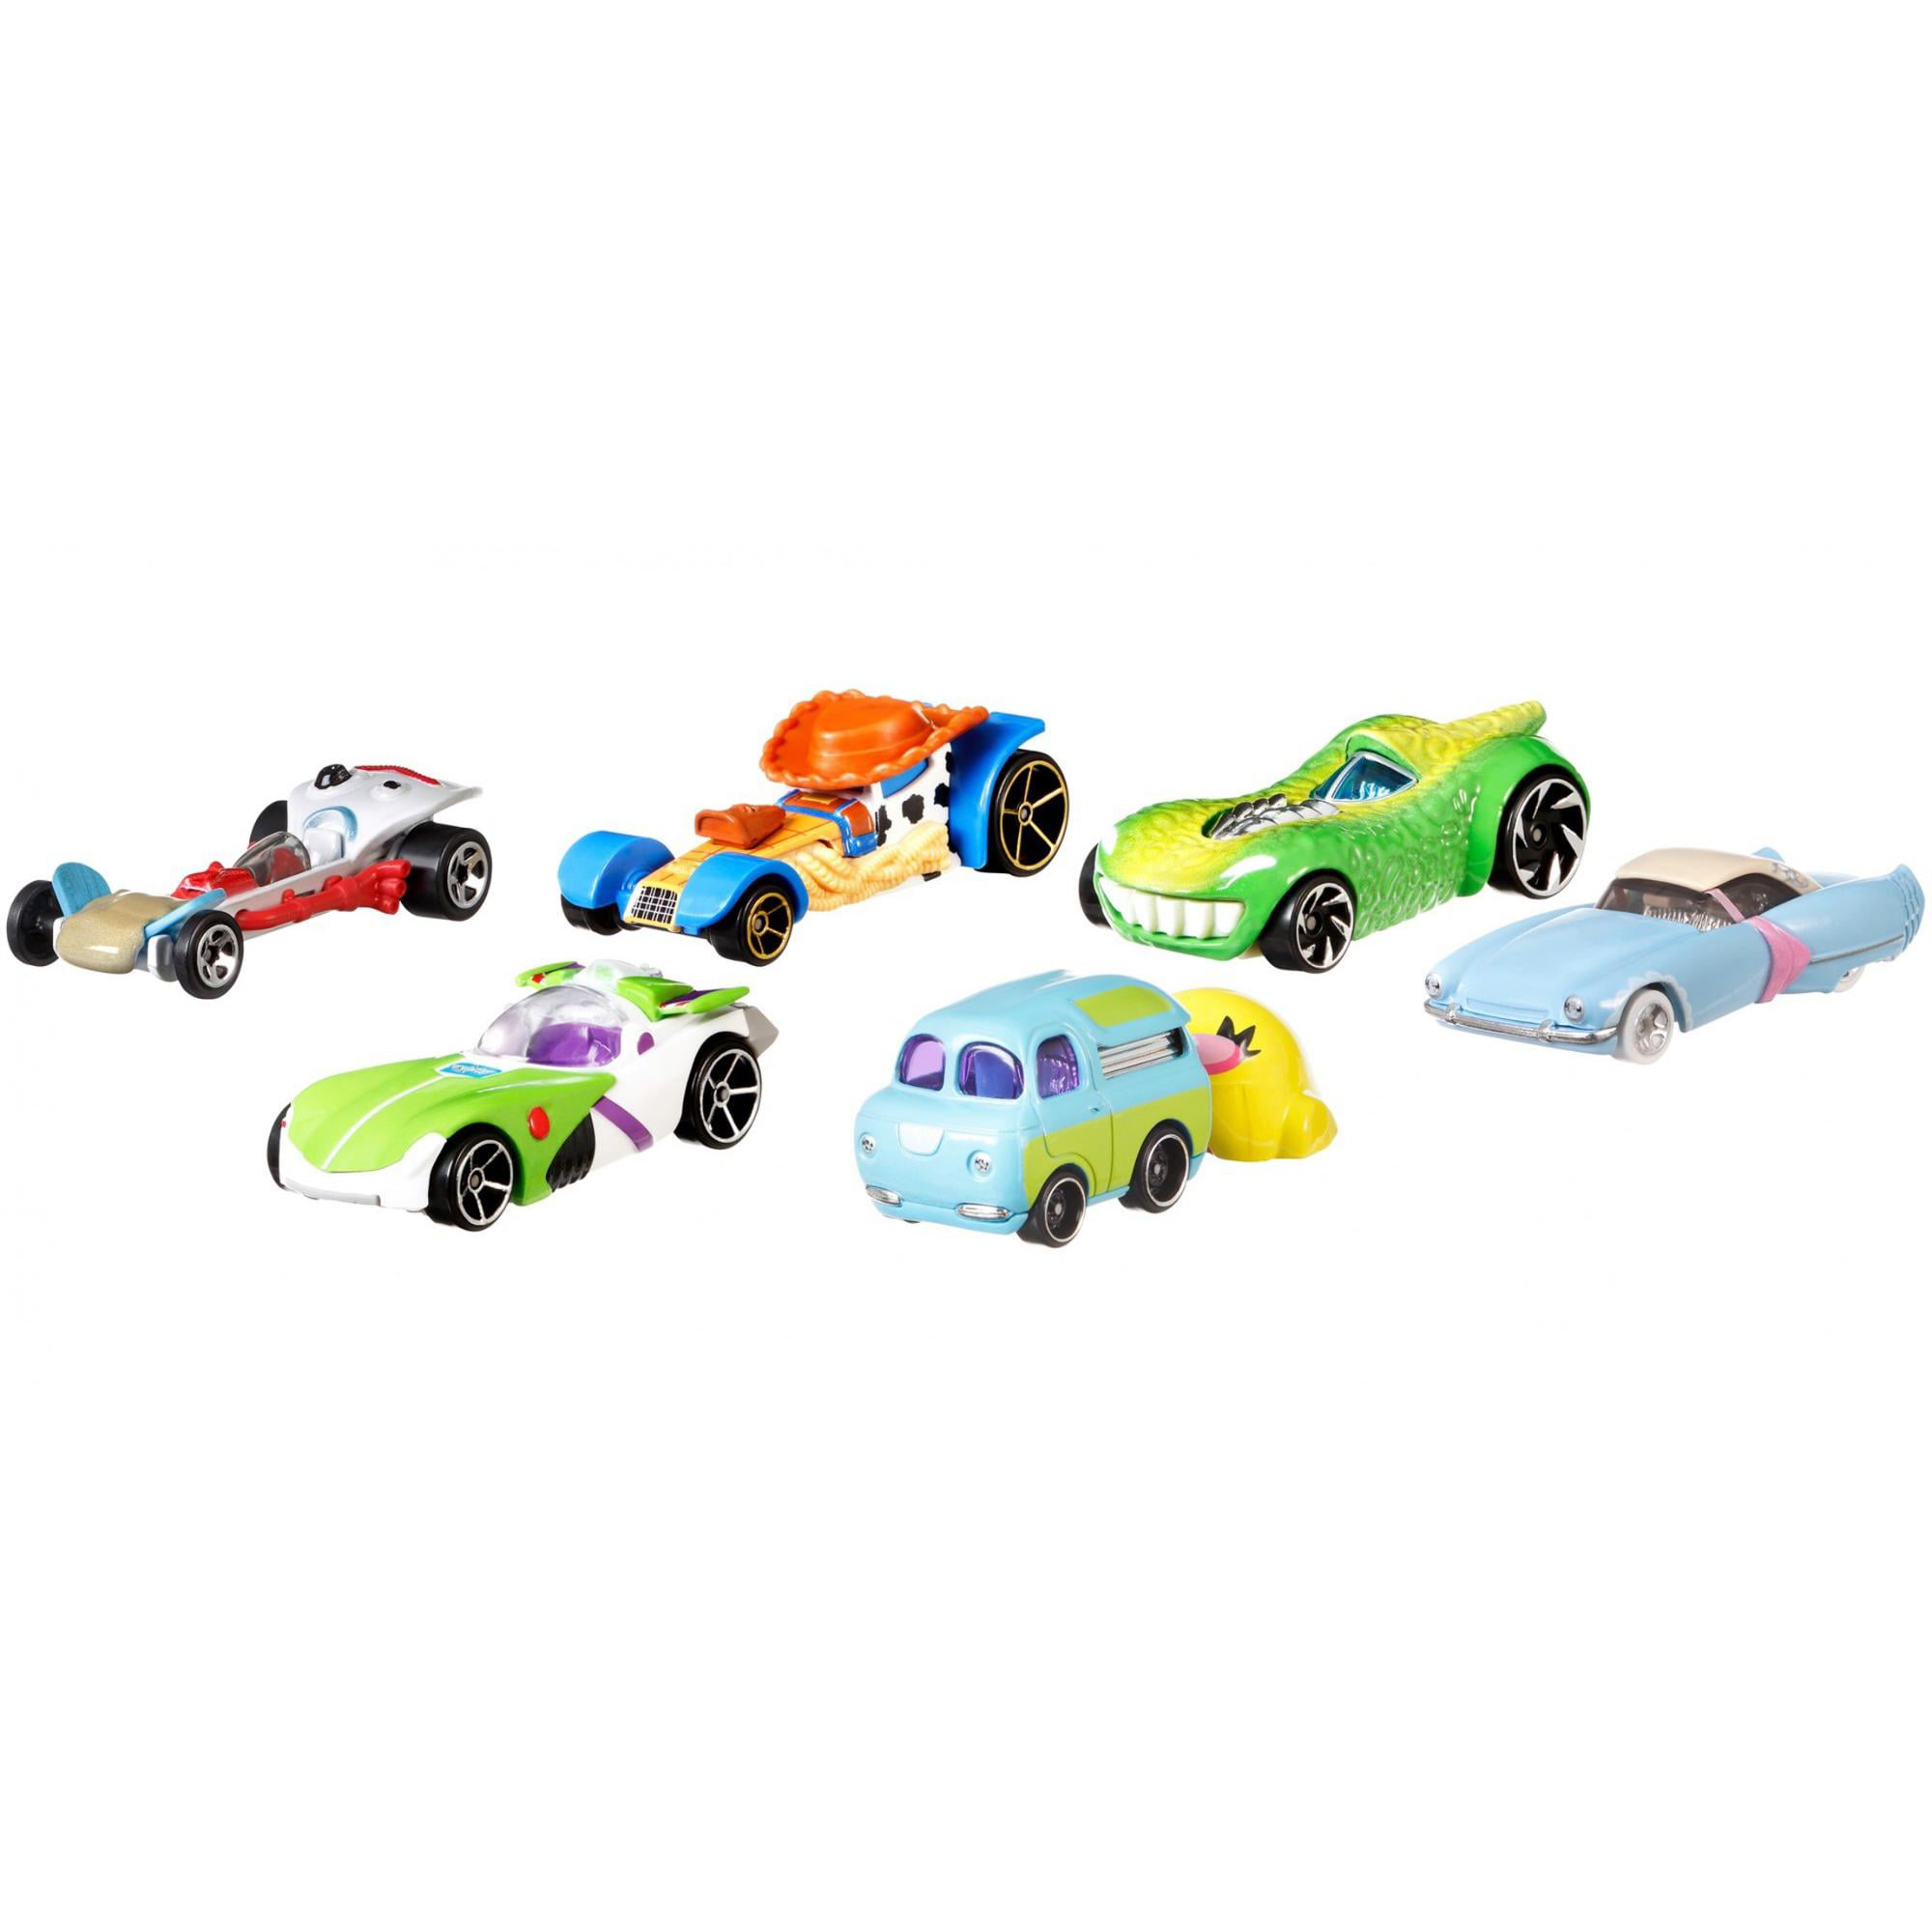 Disney Pixar Toy Story 4 Hot Wheels 1:64 Character Cars *CHOOSE YOUR FAVOURITE* 